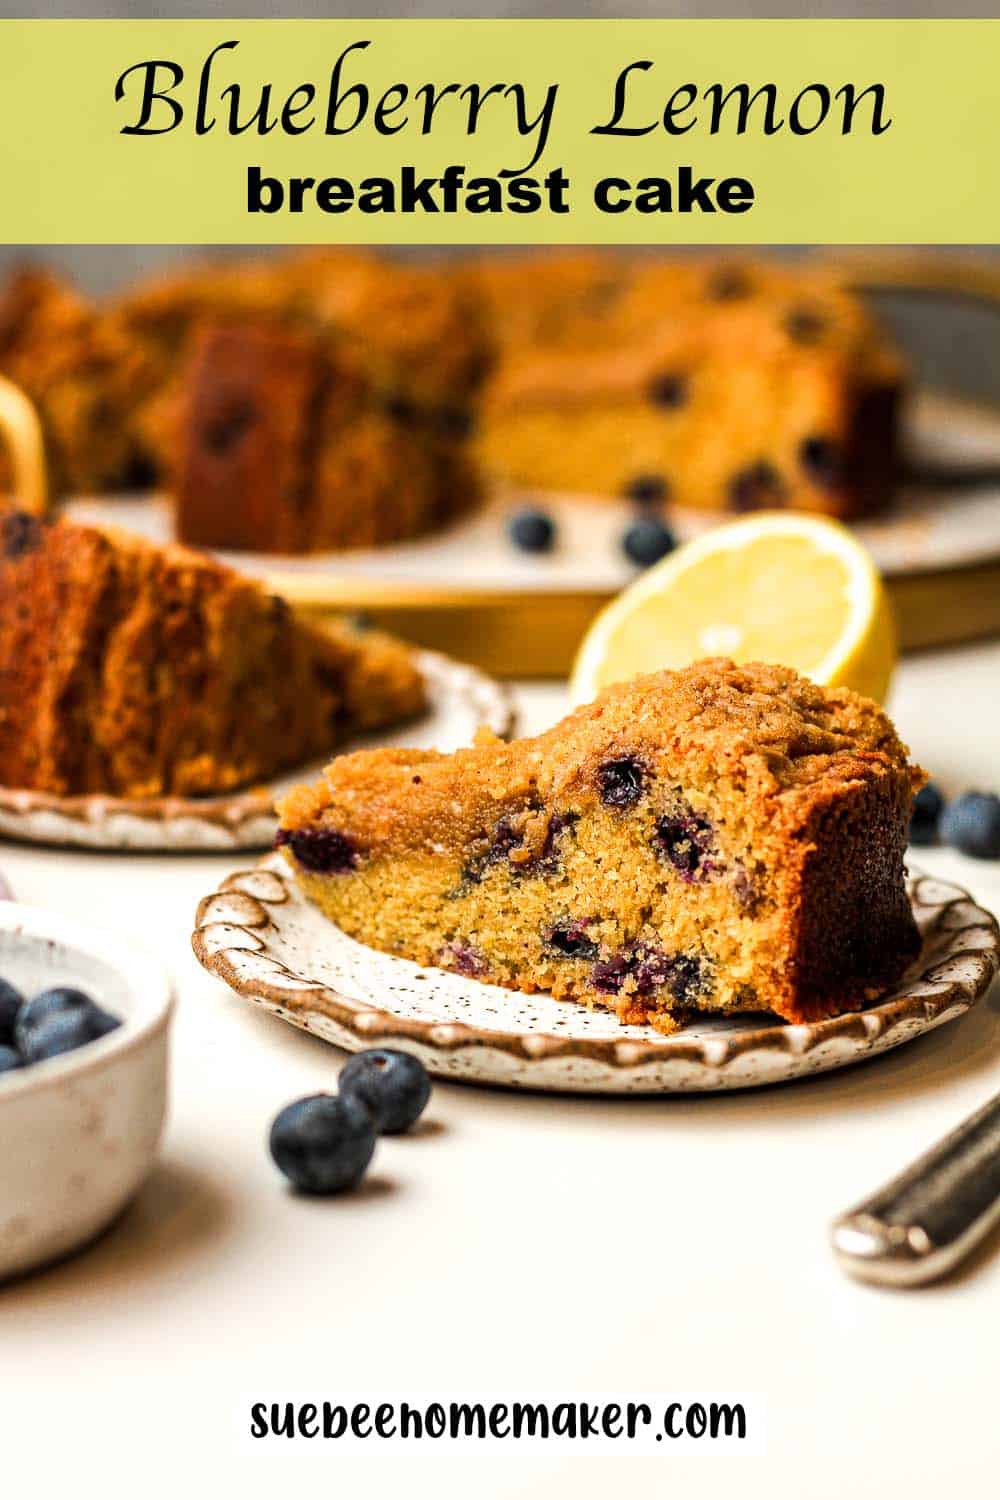 A side view of a plate of blueberry lemon breakfast cake.